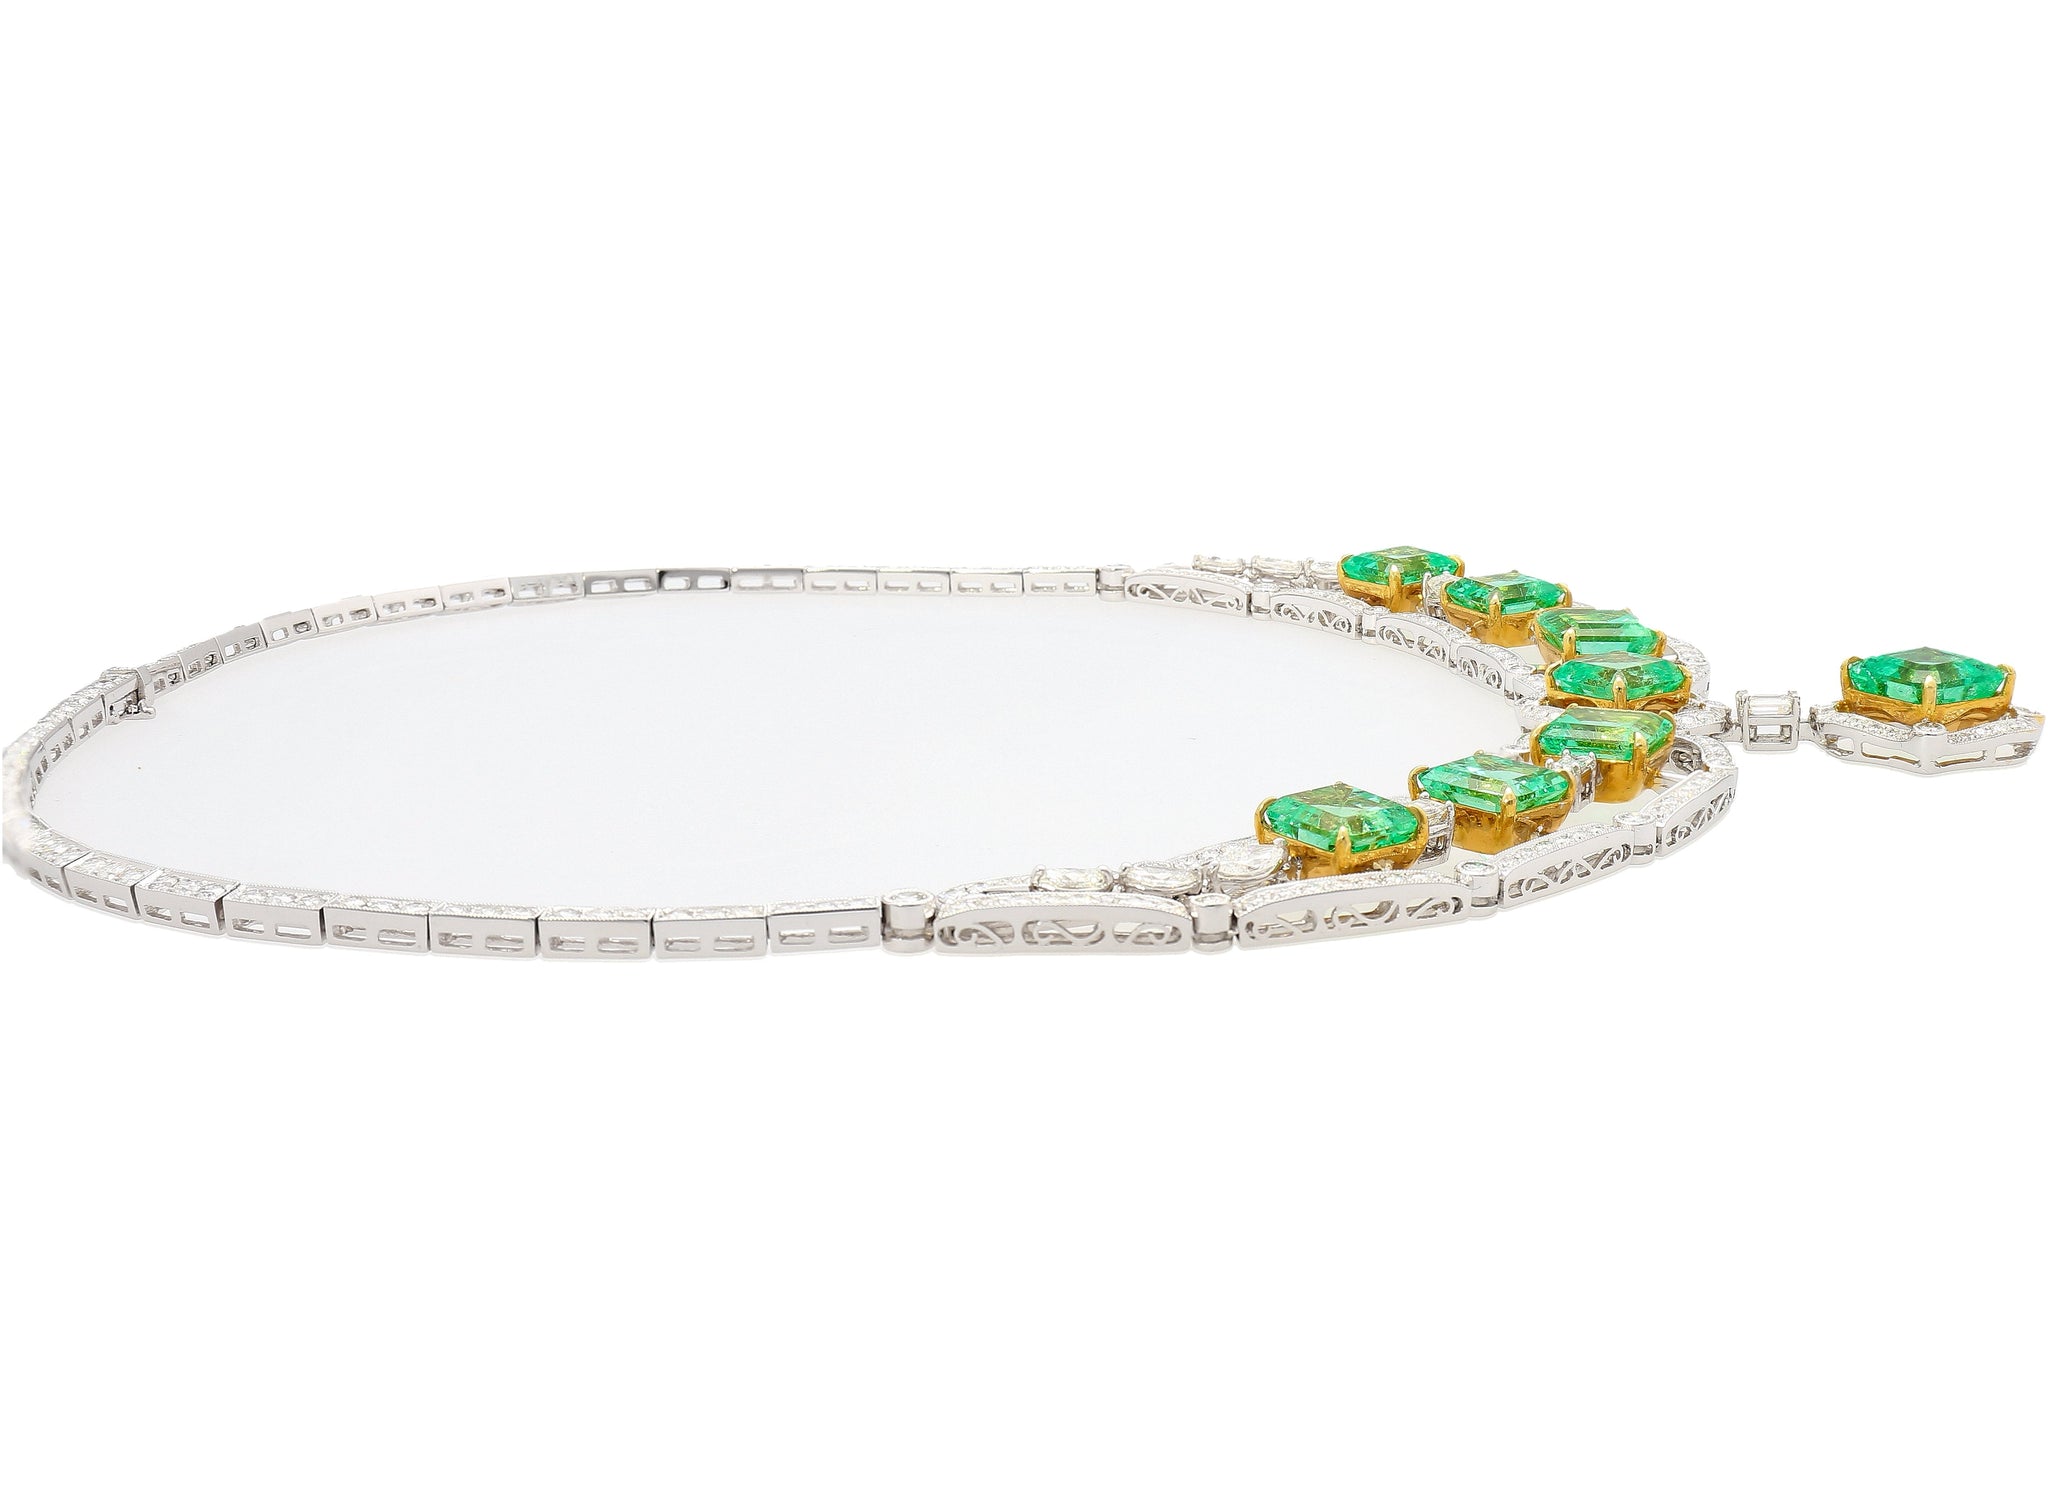 GIA Certified 6.21 Carat Emerald and 30.38 Carat Emerald With 9.86 Carat Diamonds Chandelier Necklace-Necklace-ASSAY